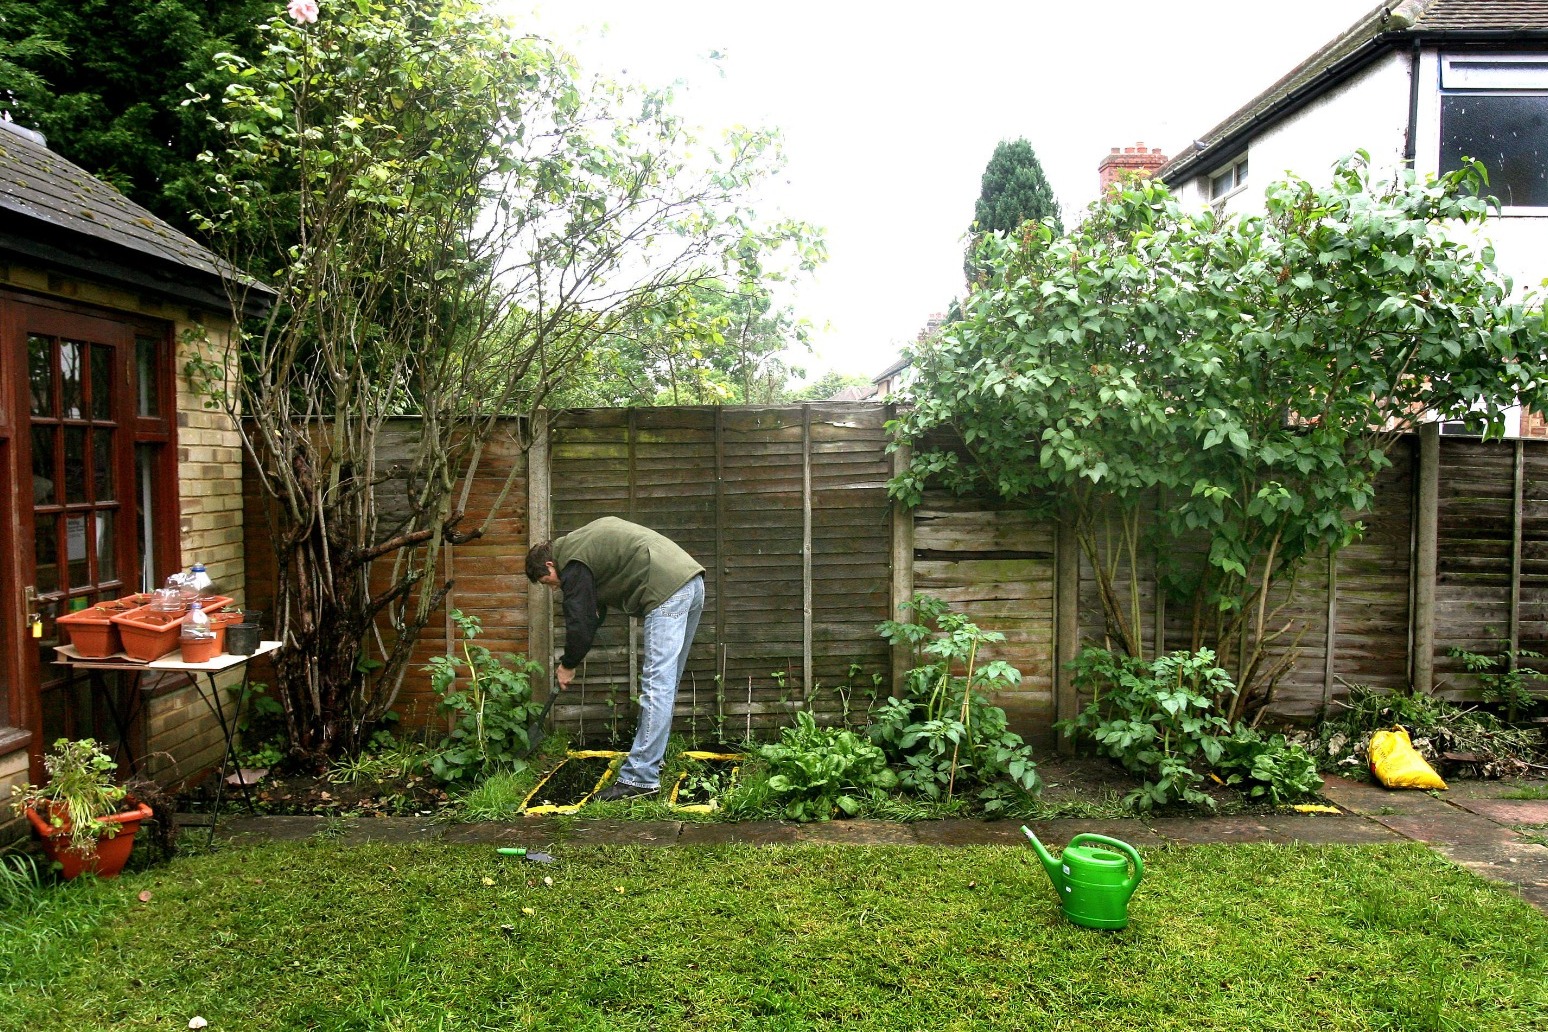 Spending time in the garden good for health well-being, study suggests 